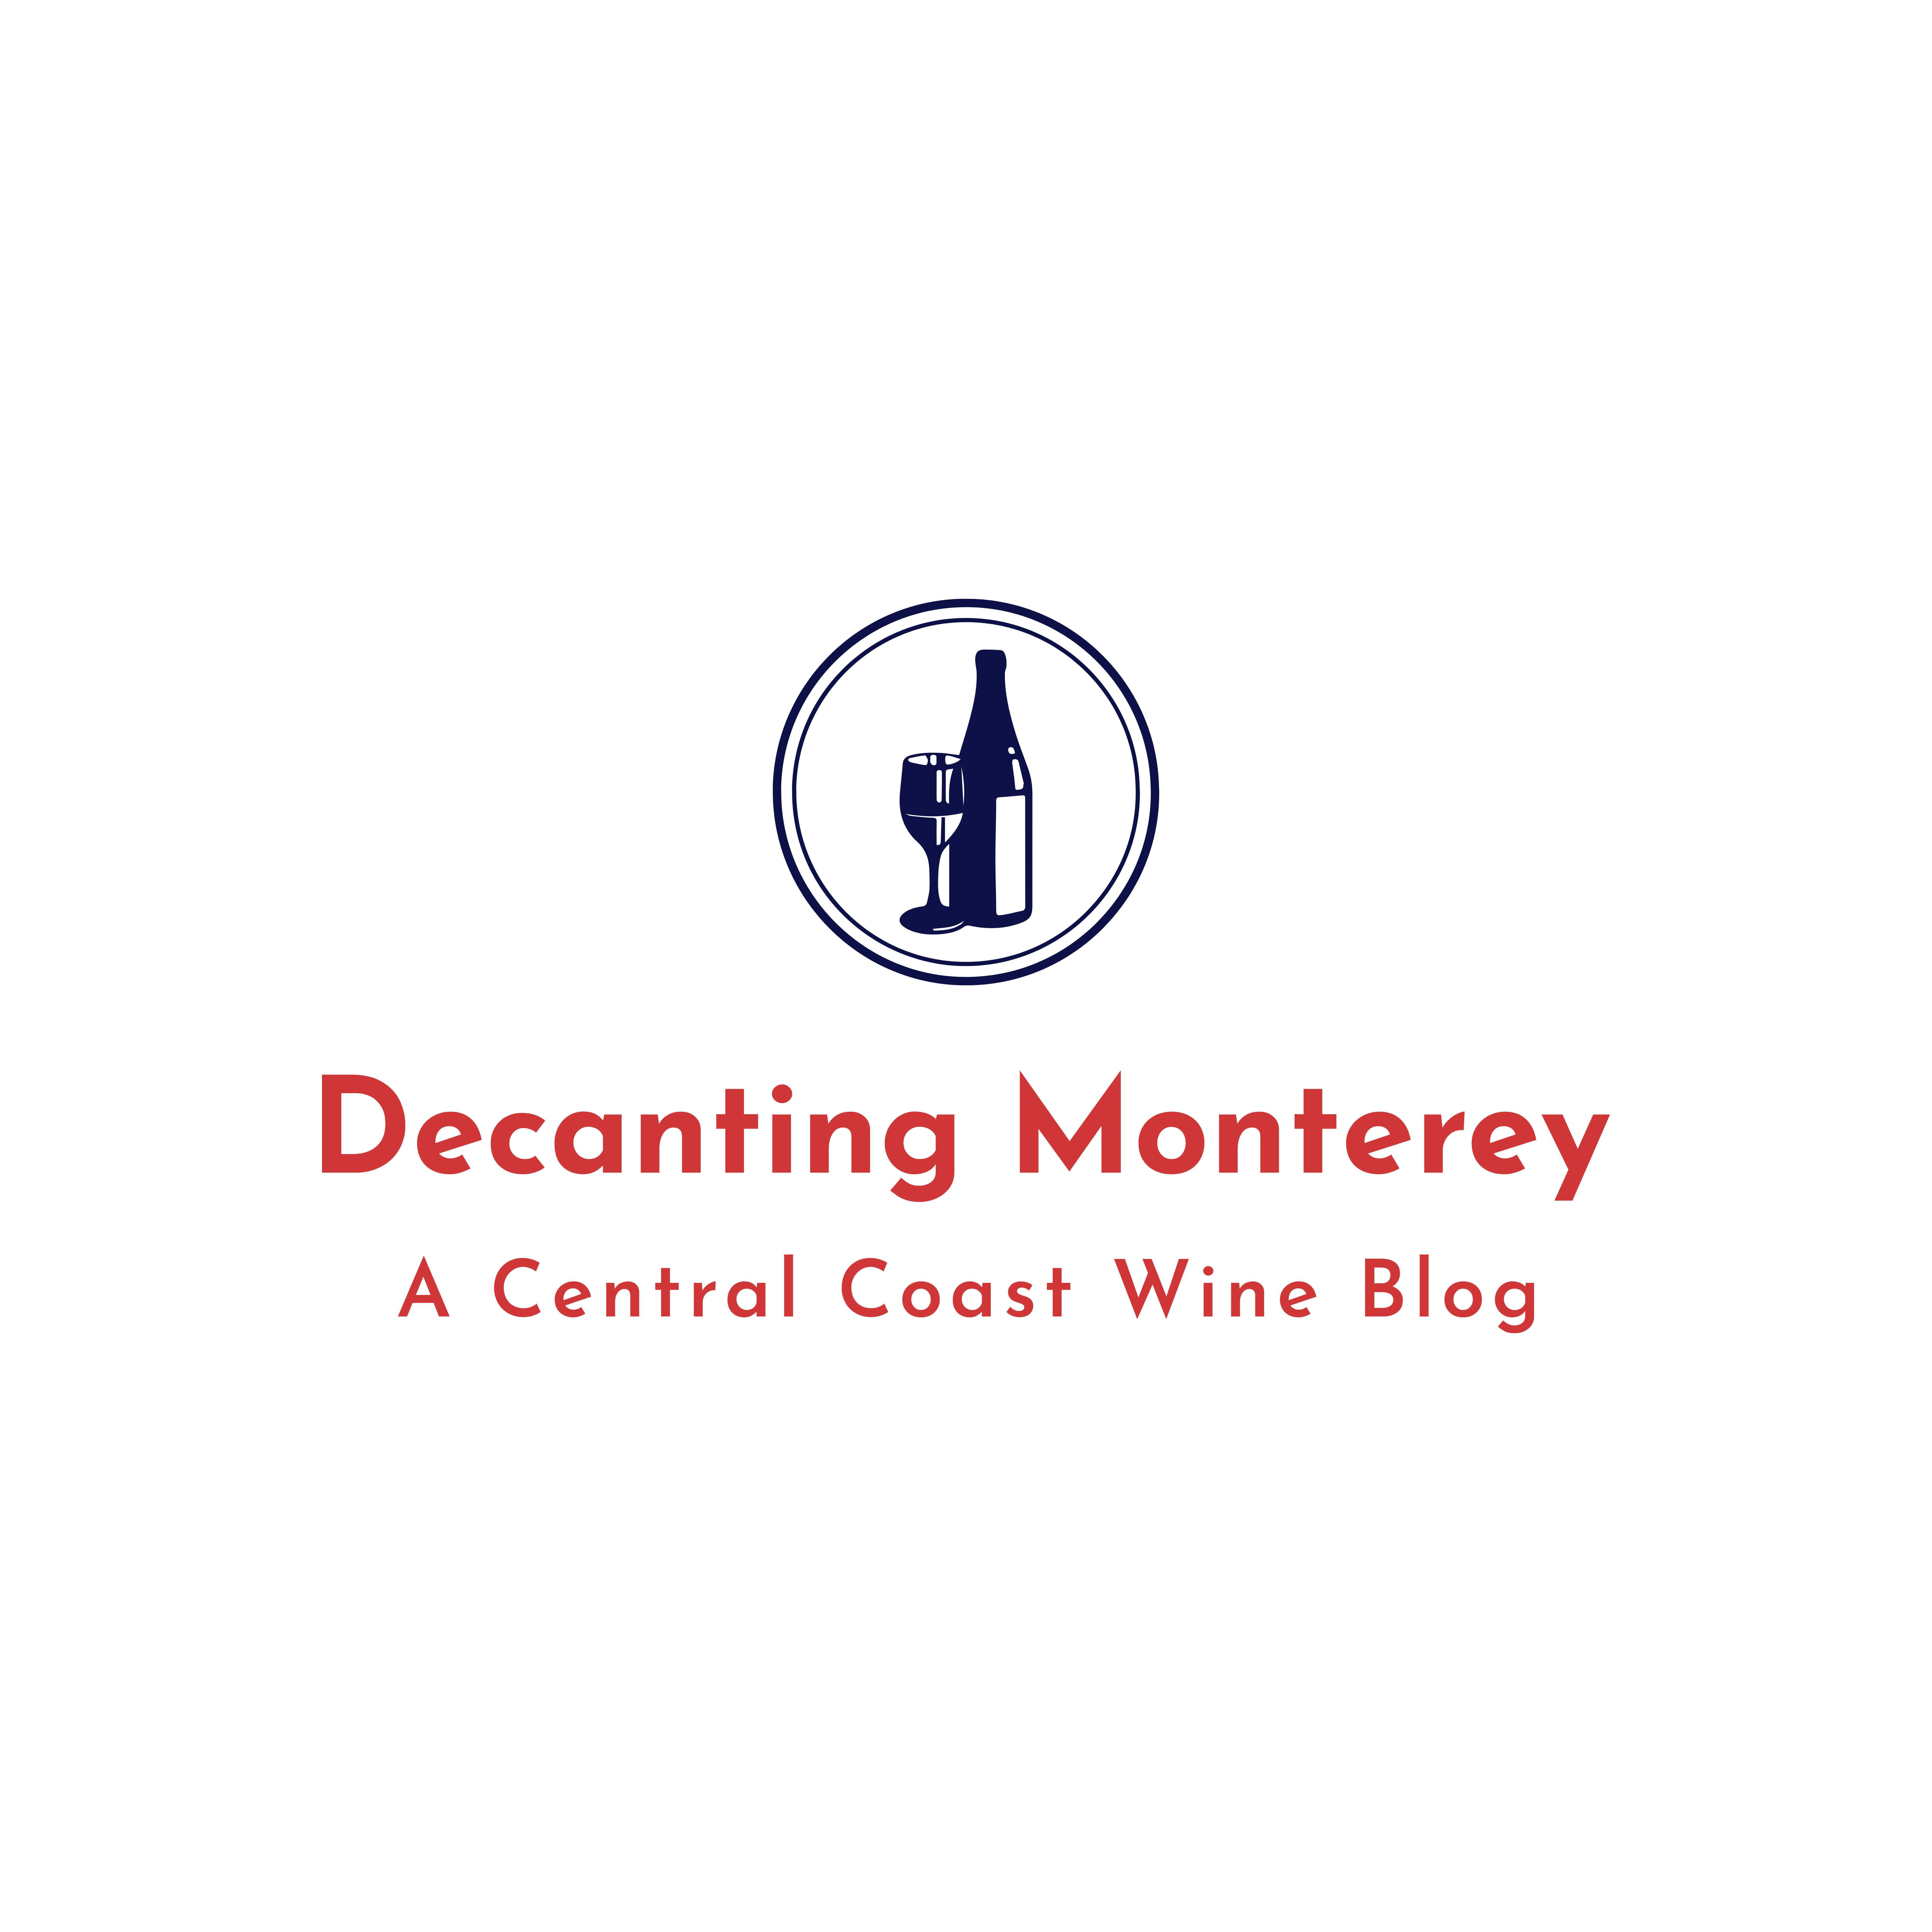 Decanting Monterey - A Central Coast Wine Blog